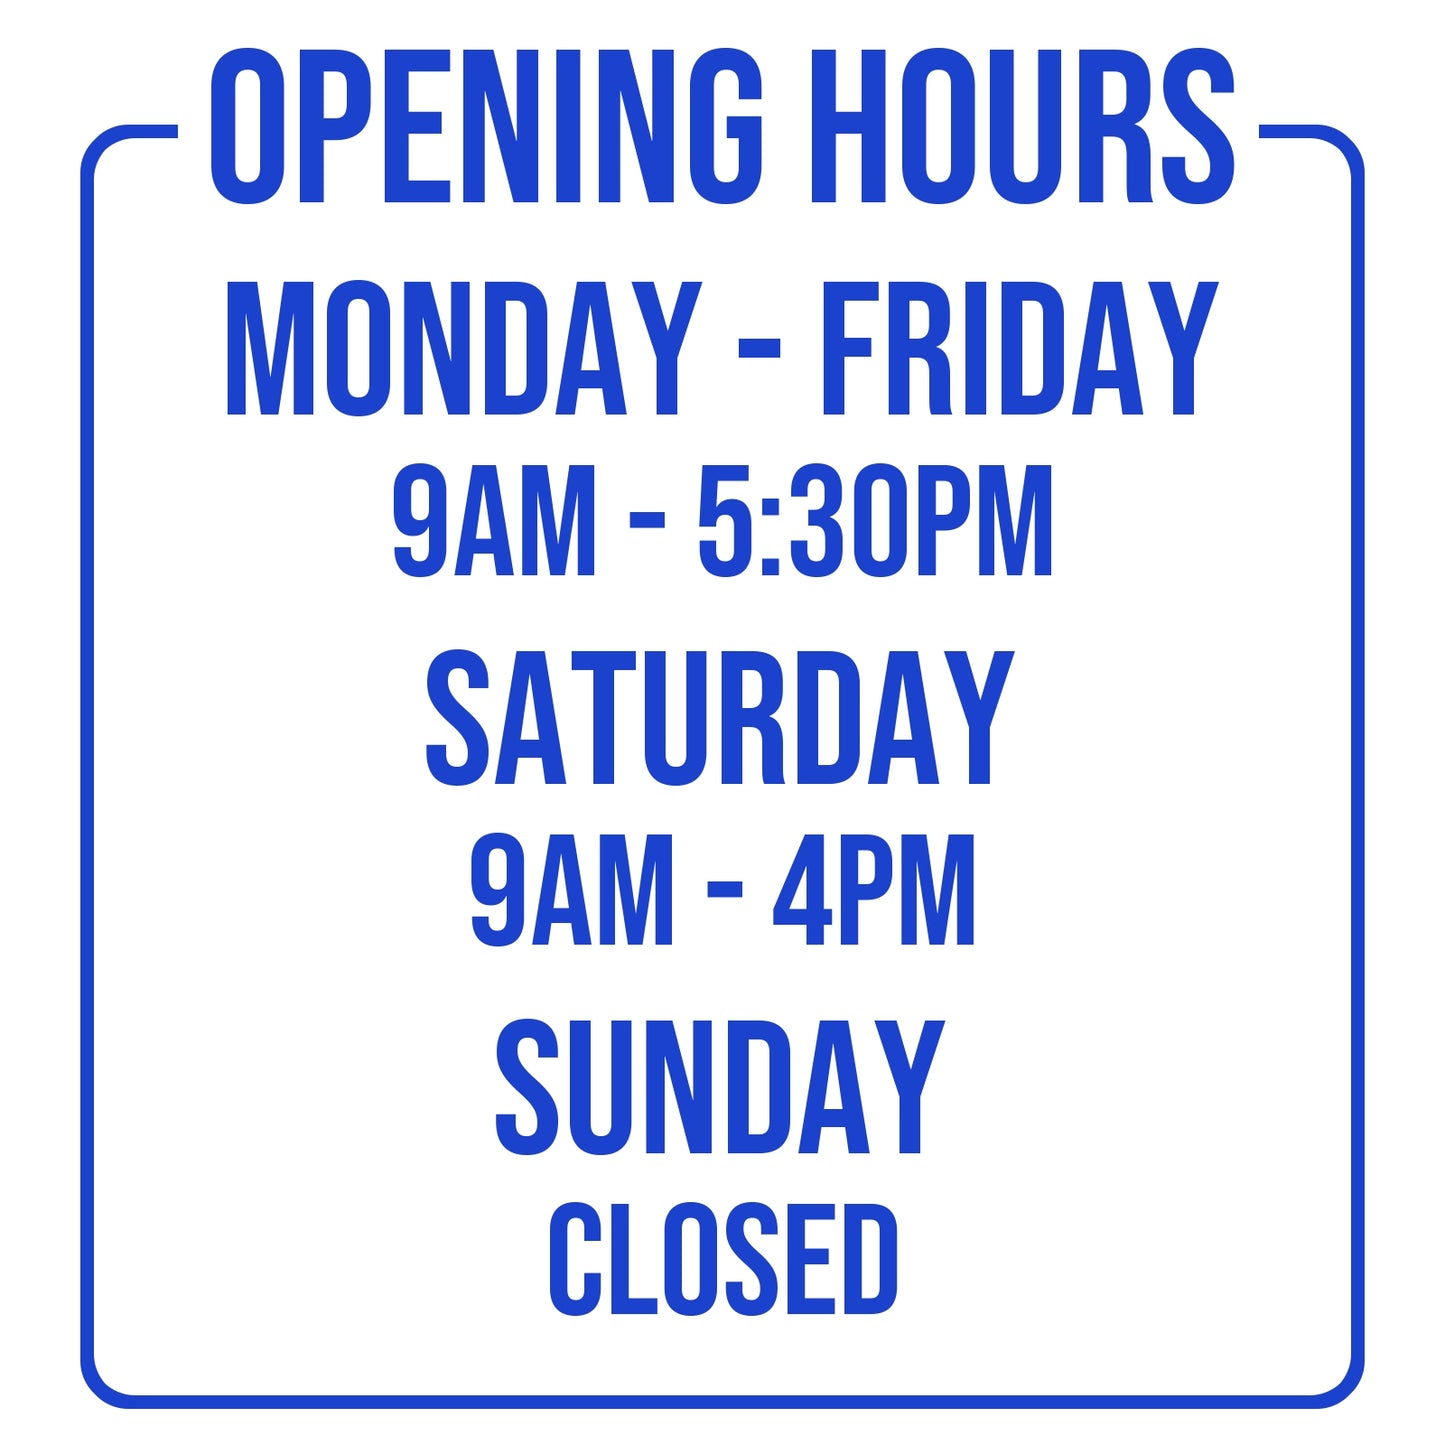 Opening Times for Shop Business Window in Dark Blue